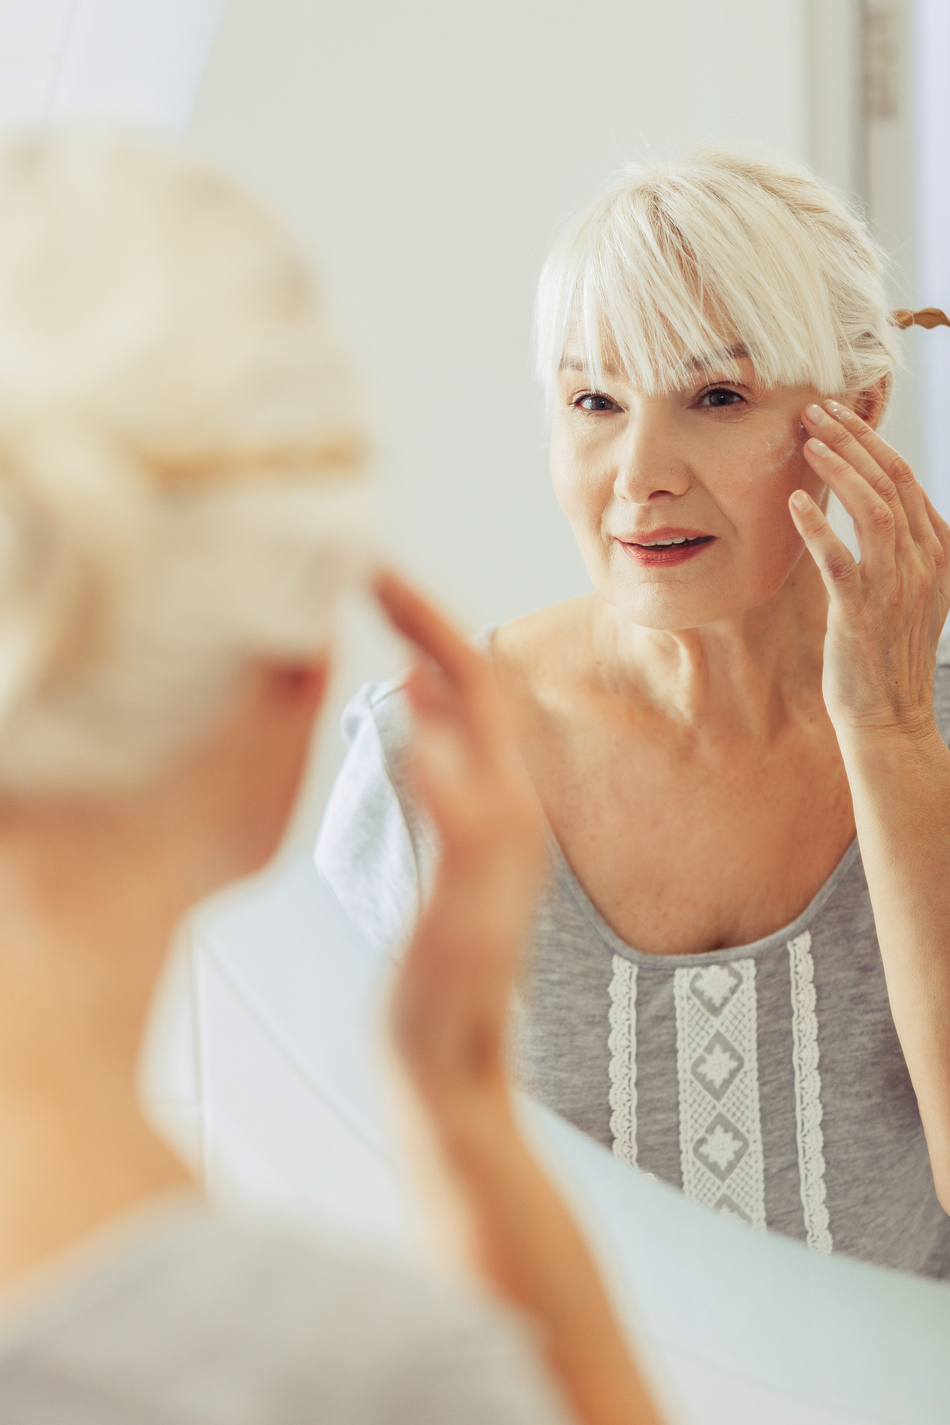 What Options Are Available for Facial Rejuvenation at Any Age?